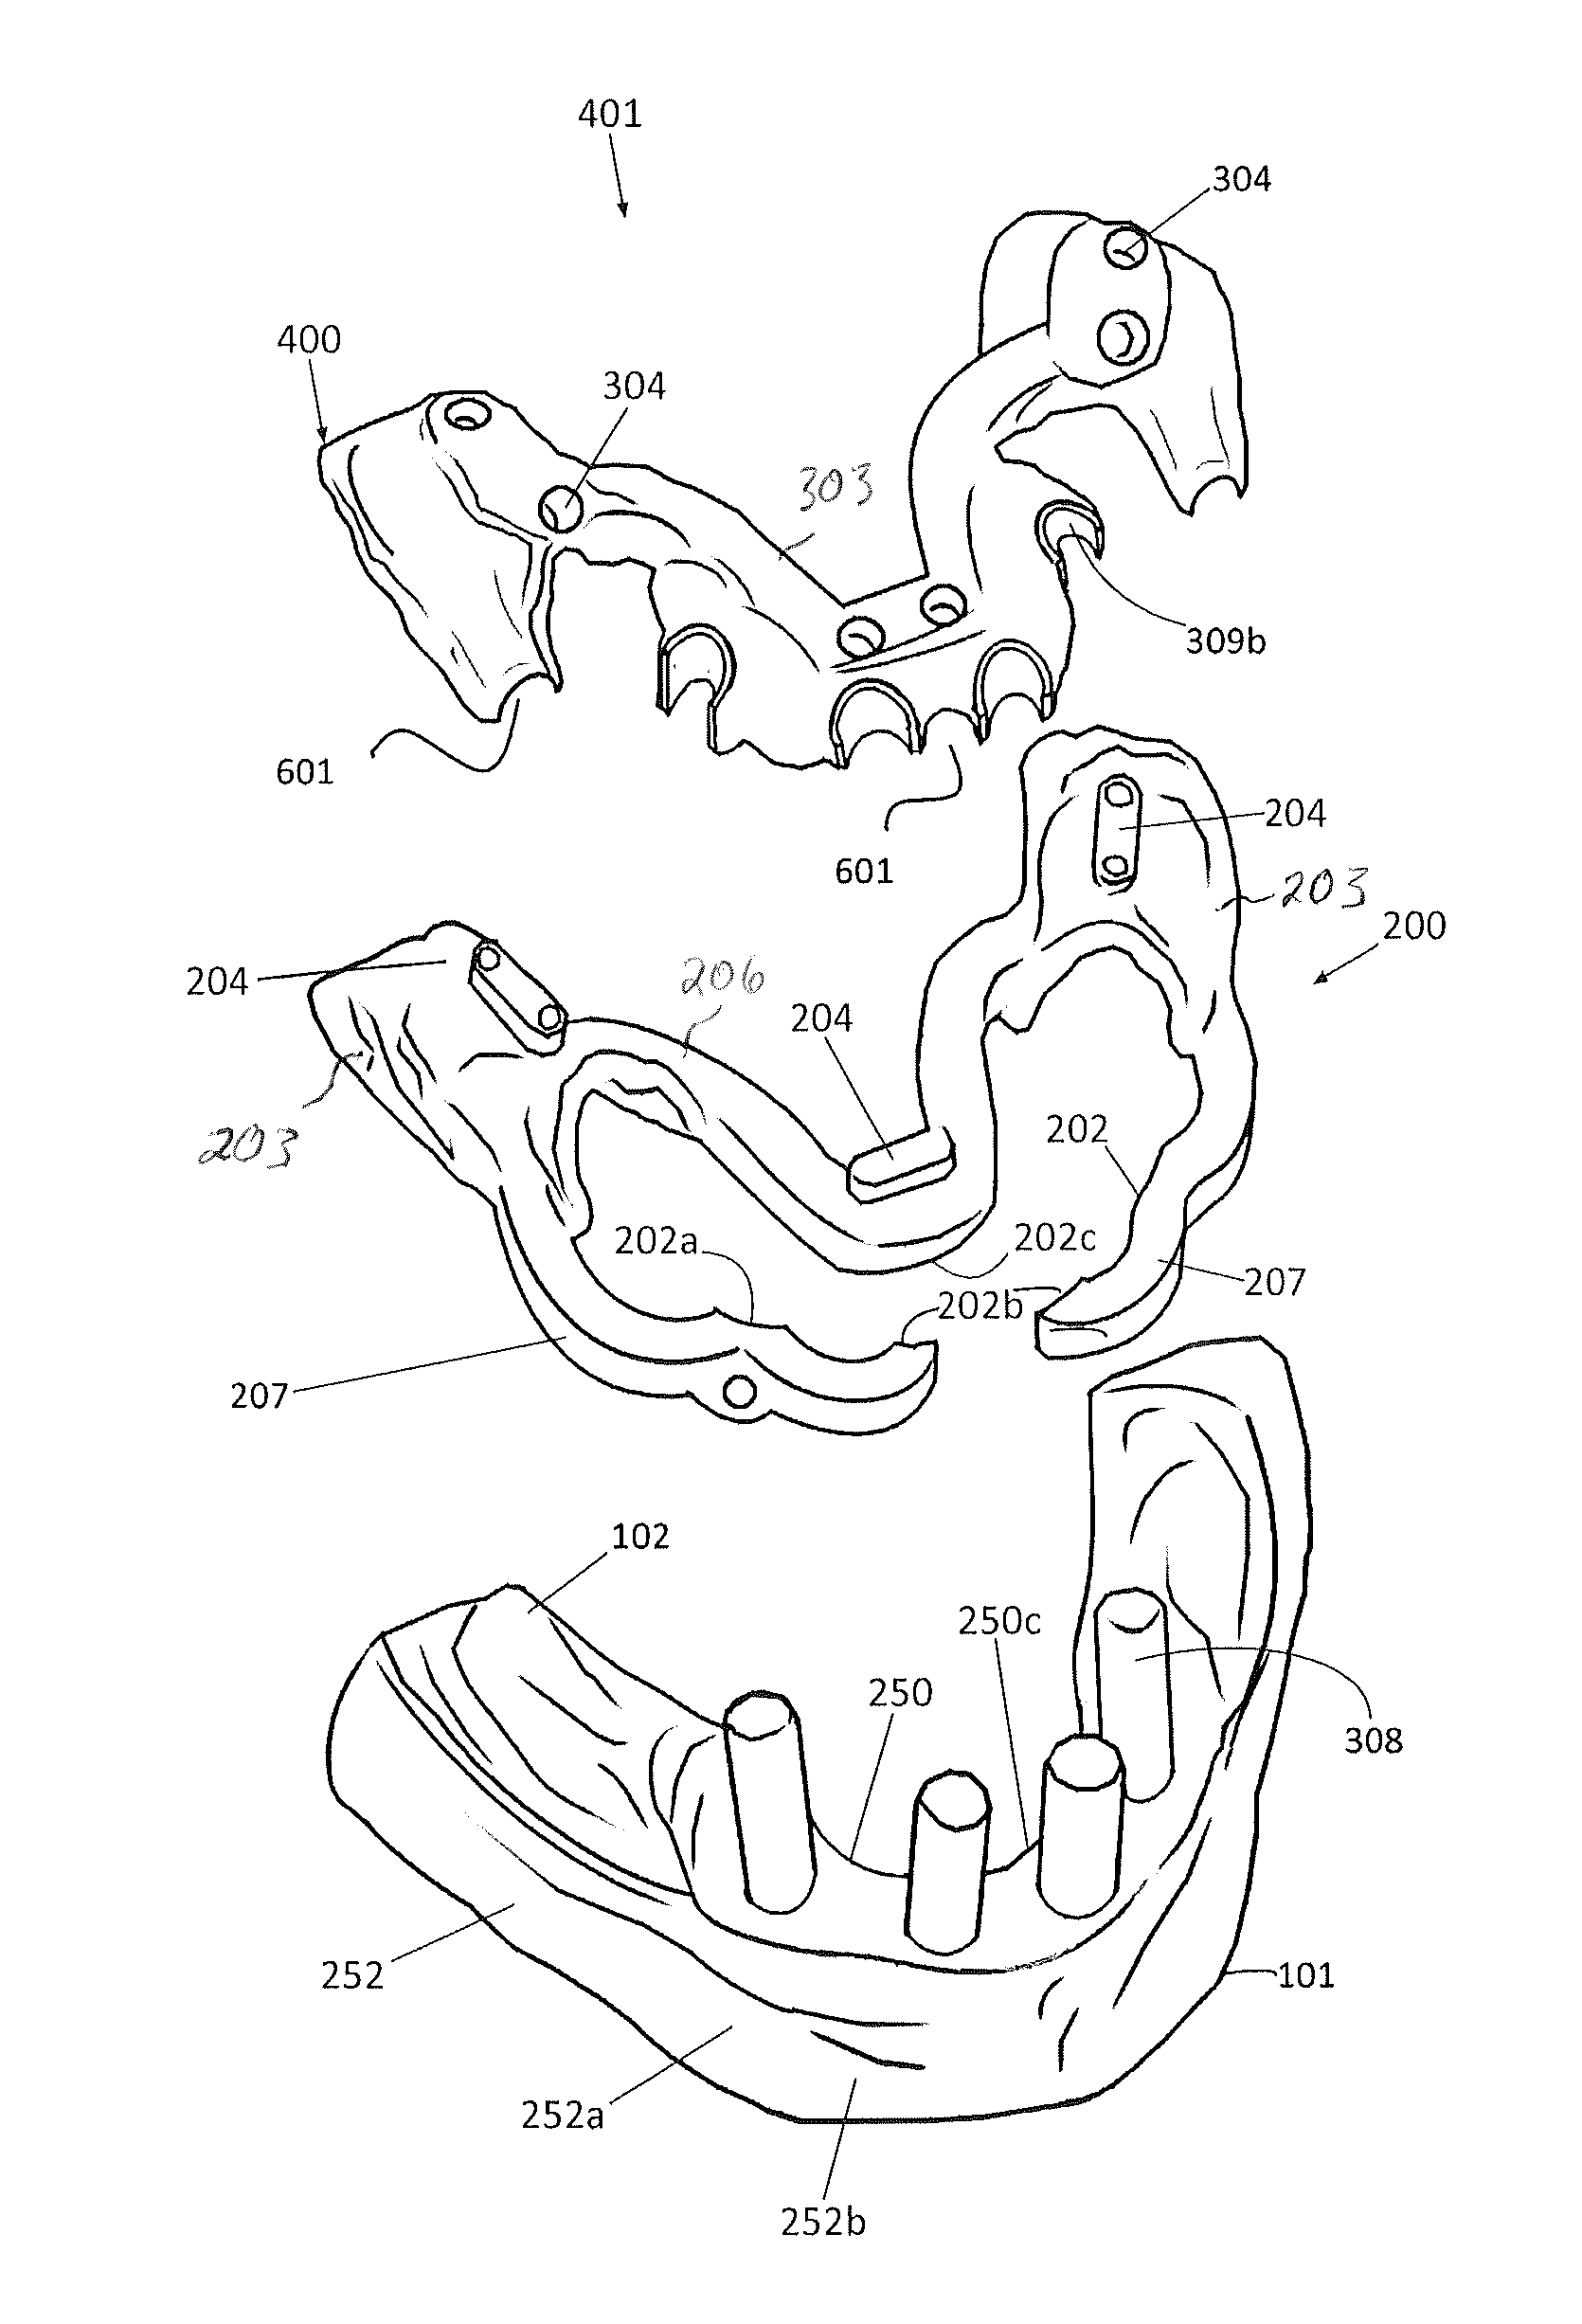 Edentulous surgical guide